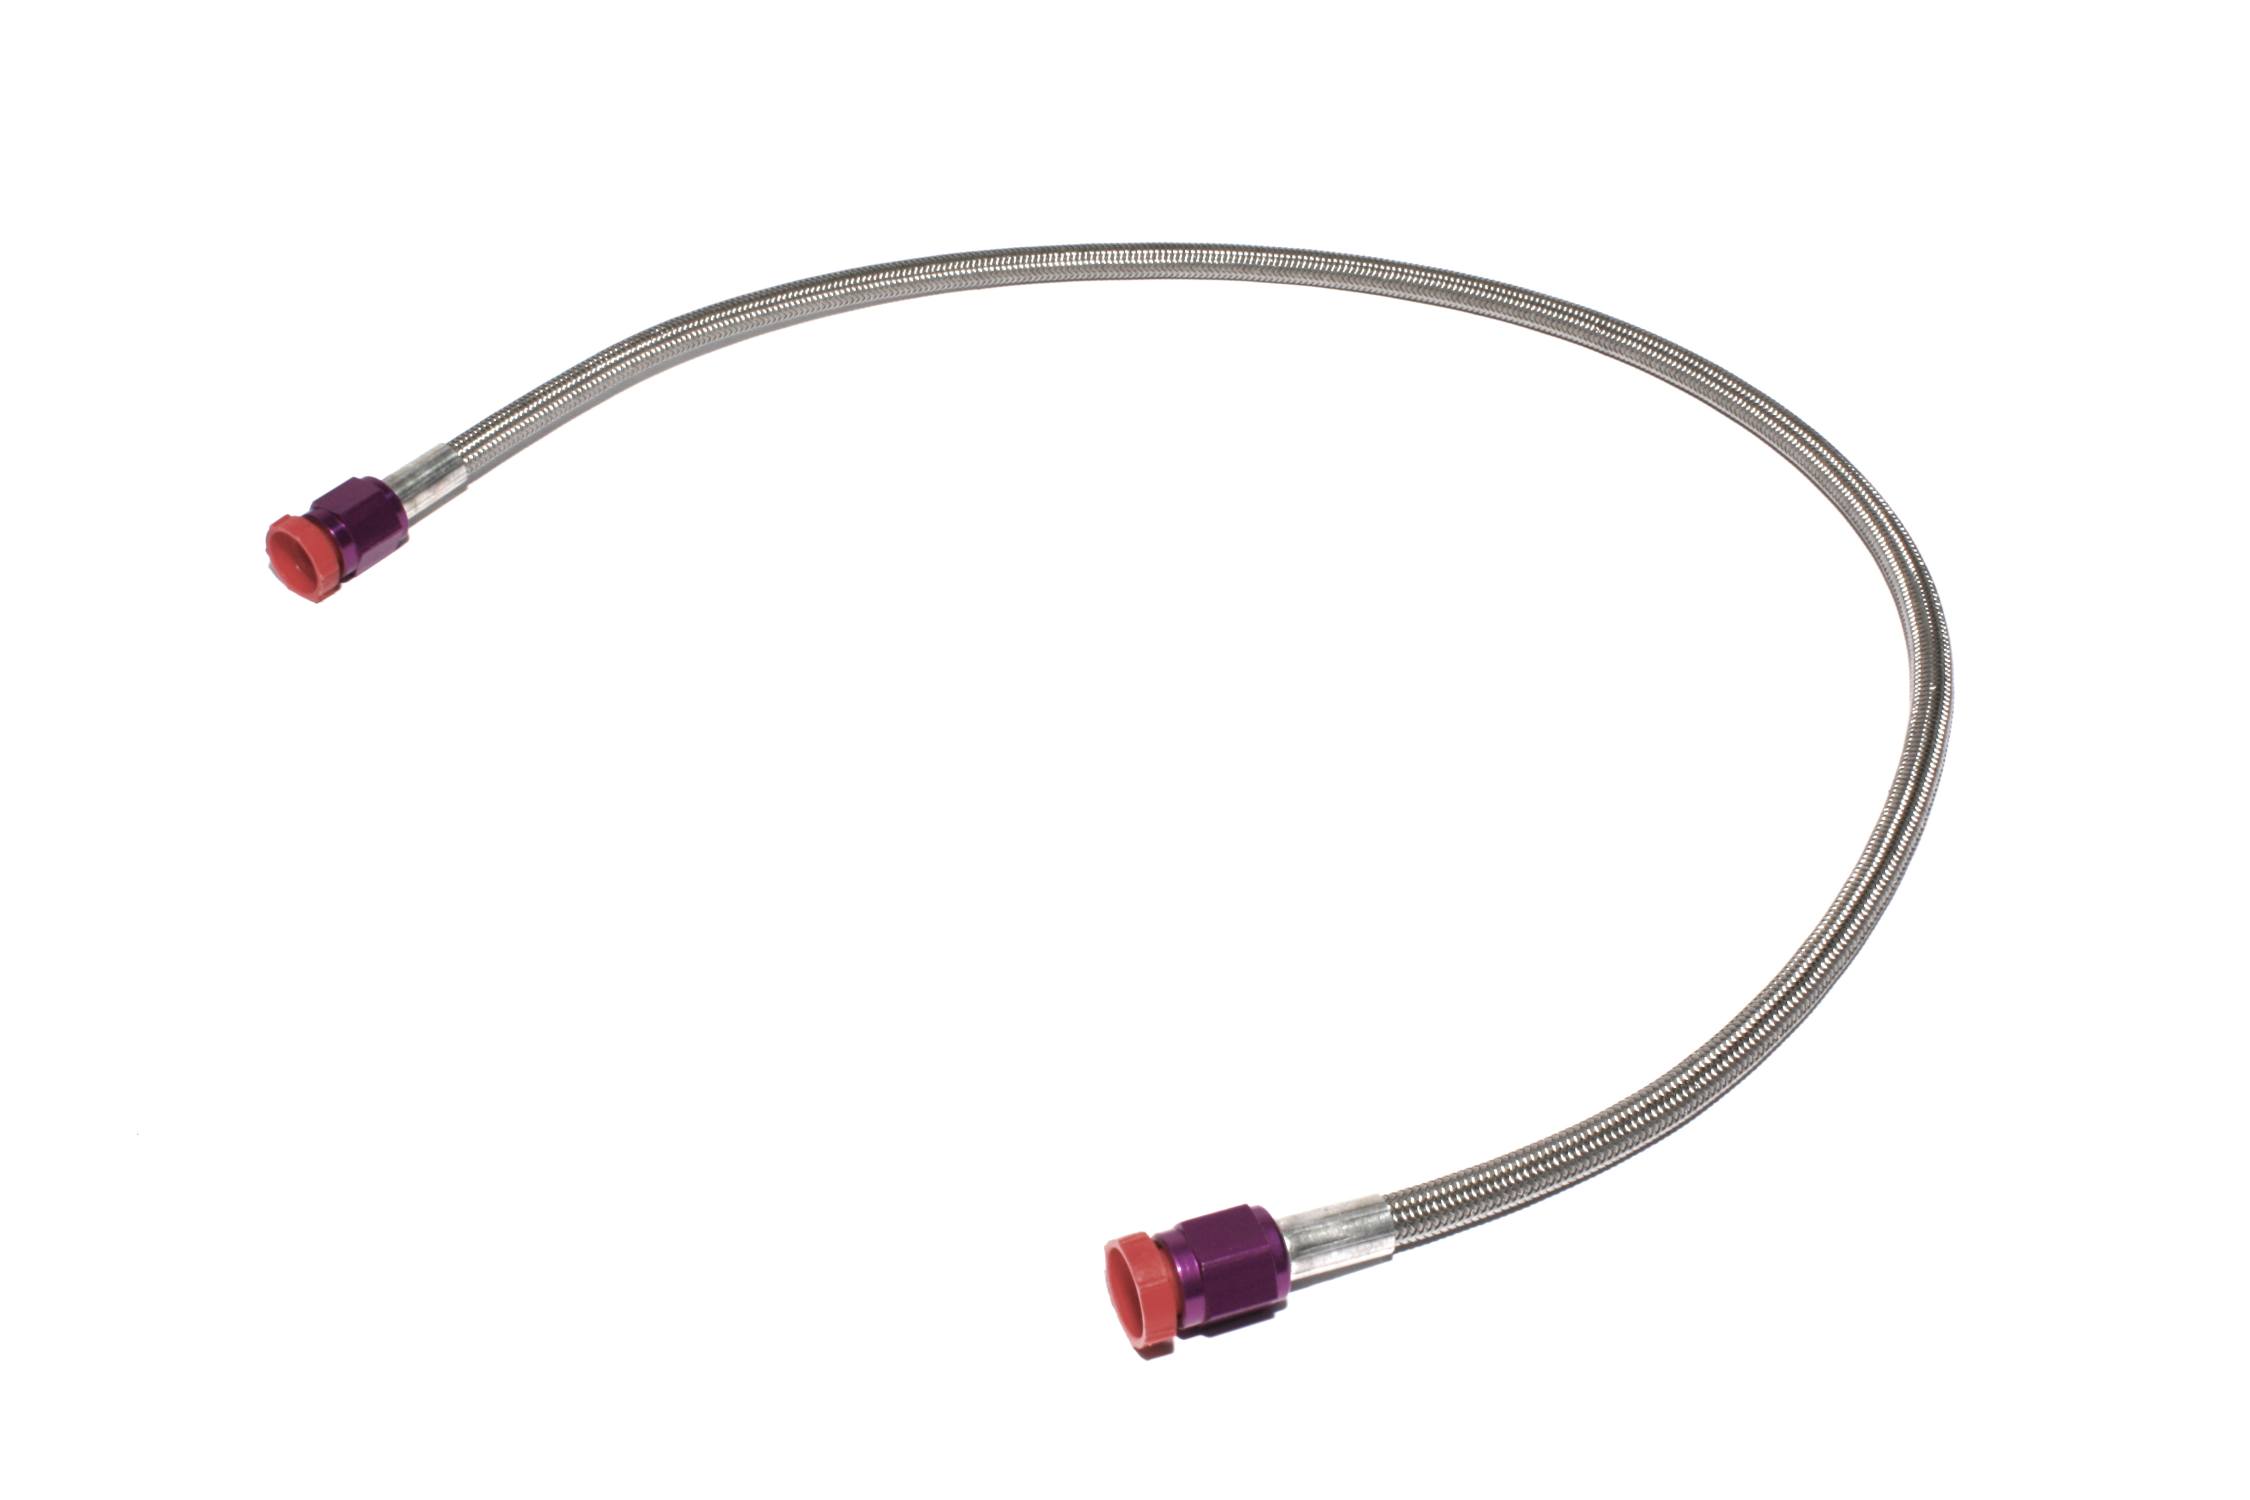 ZEX 2' (ft) Long -4AN Braided Hose with Purple Ends, 4AN 2', Corvette, Camaro and others